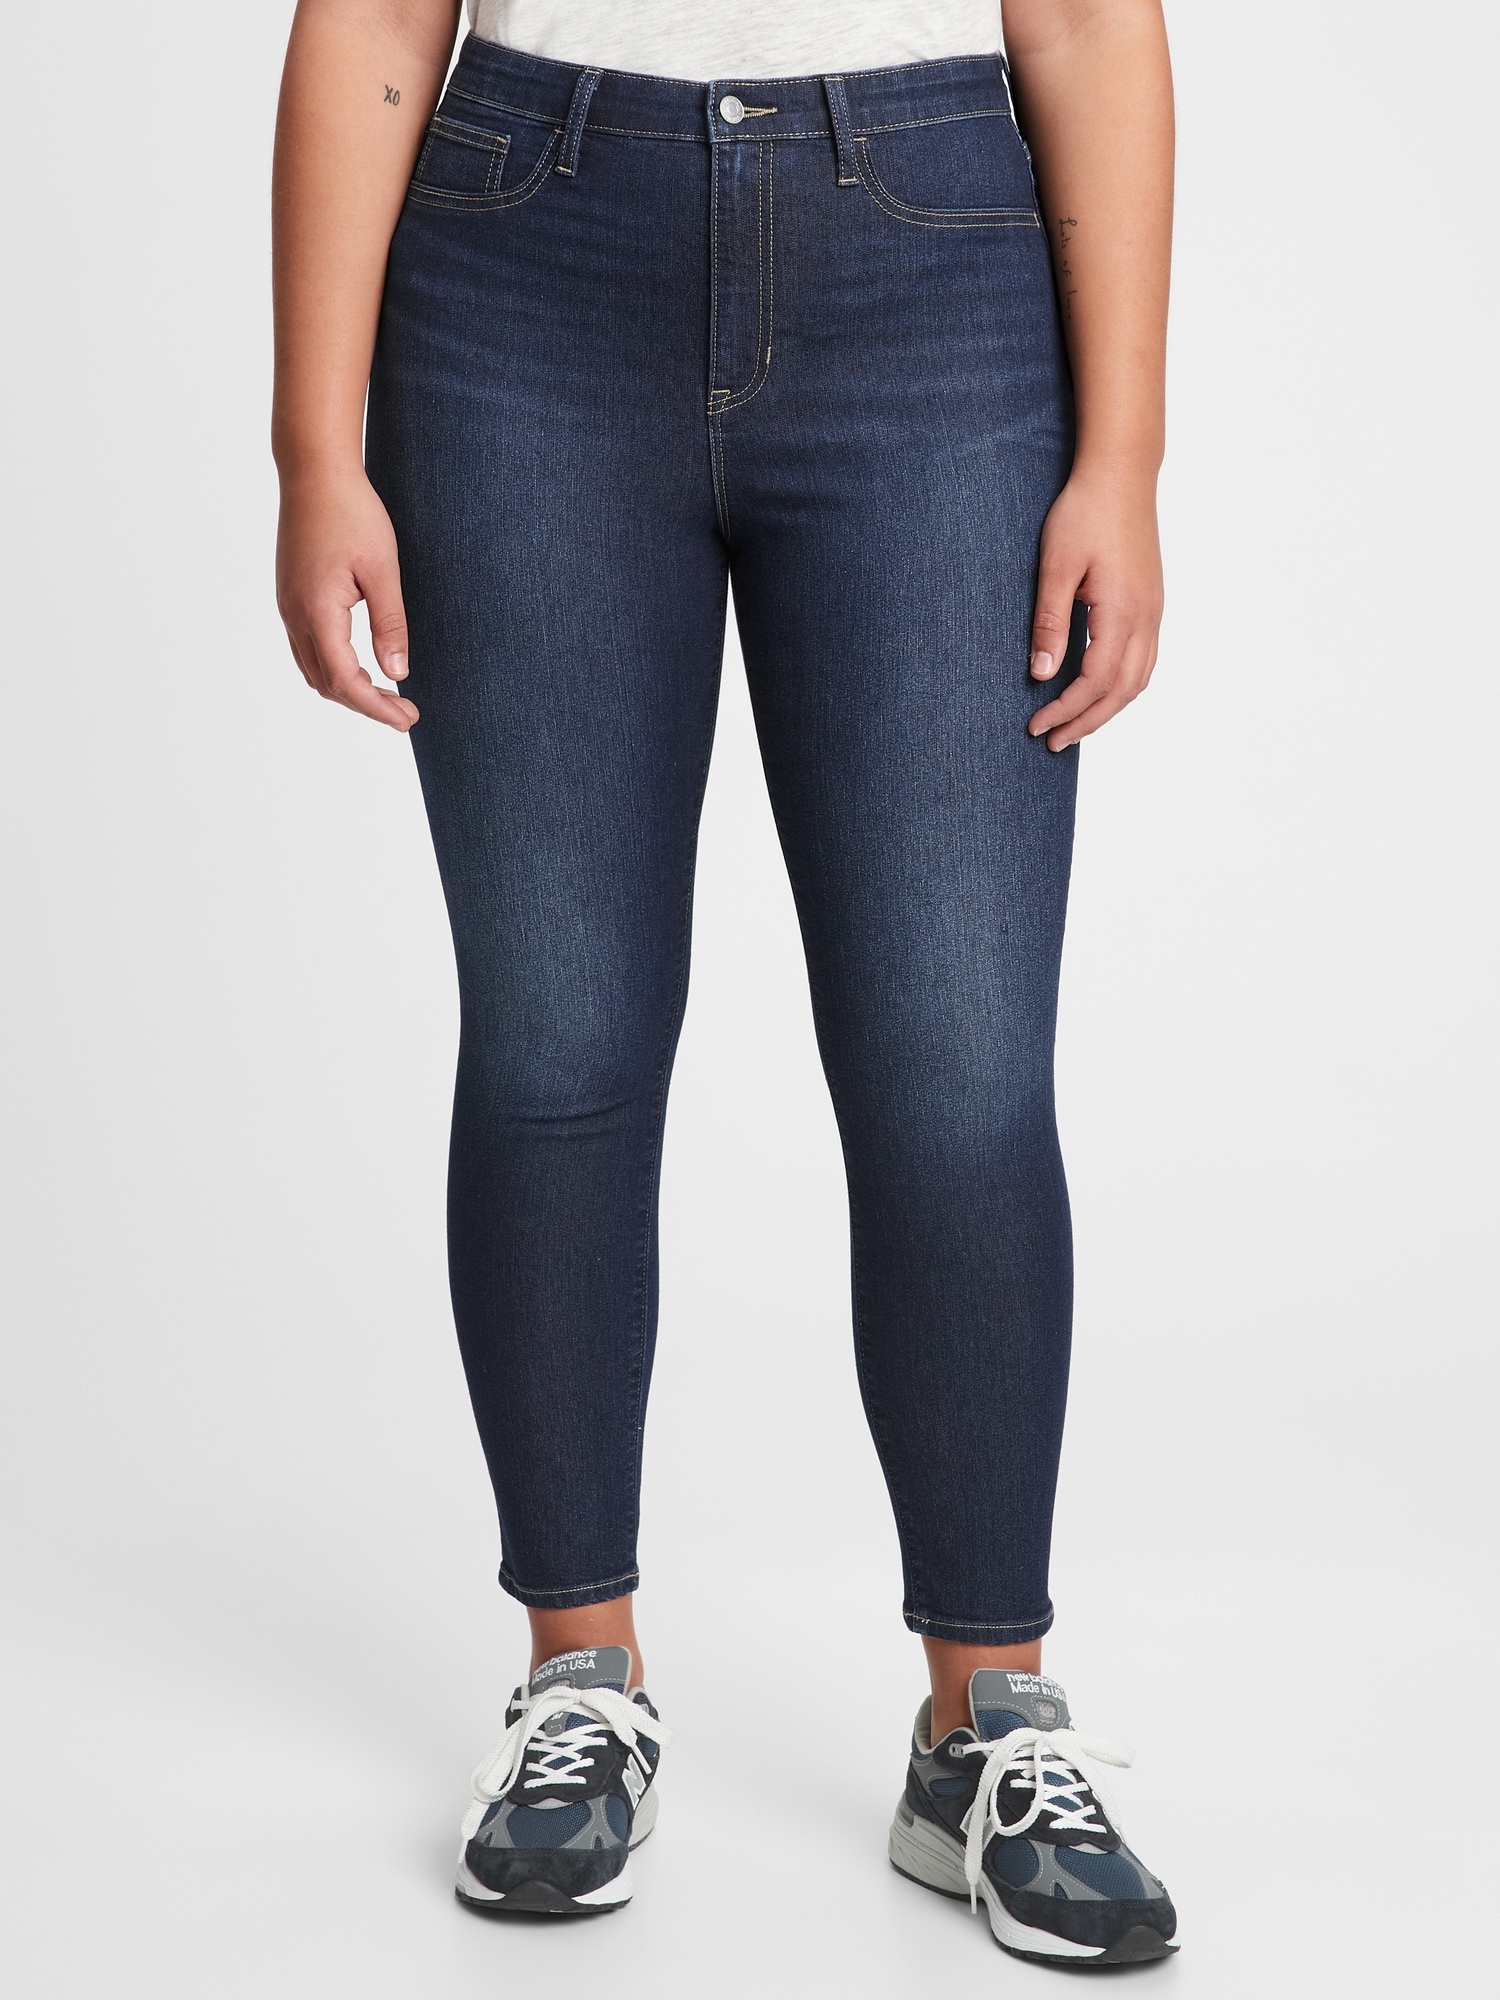 These Jeggings Are an  Bestseller — Over 8,000 5-Star Reviews